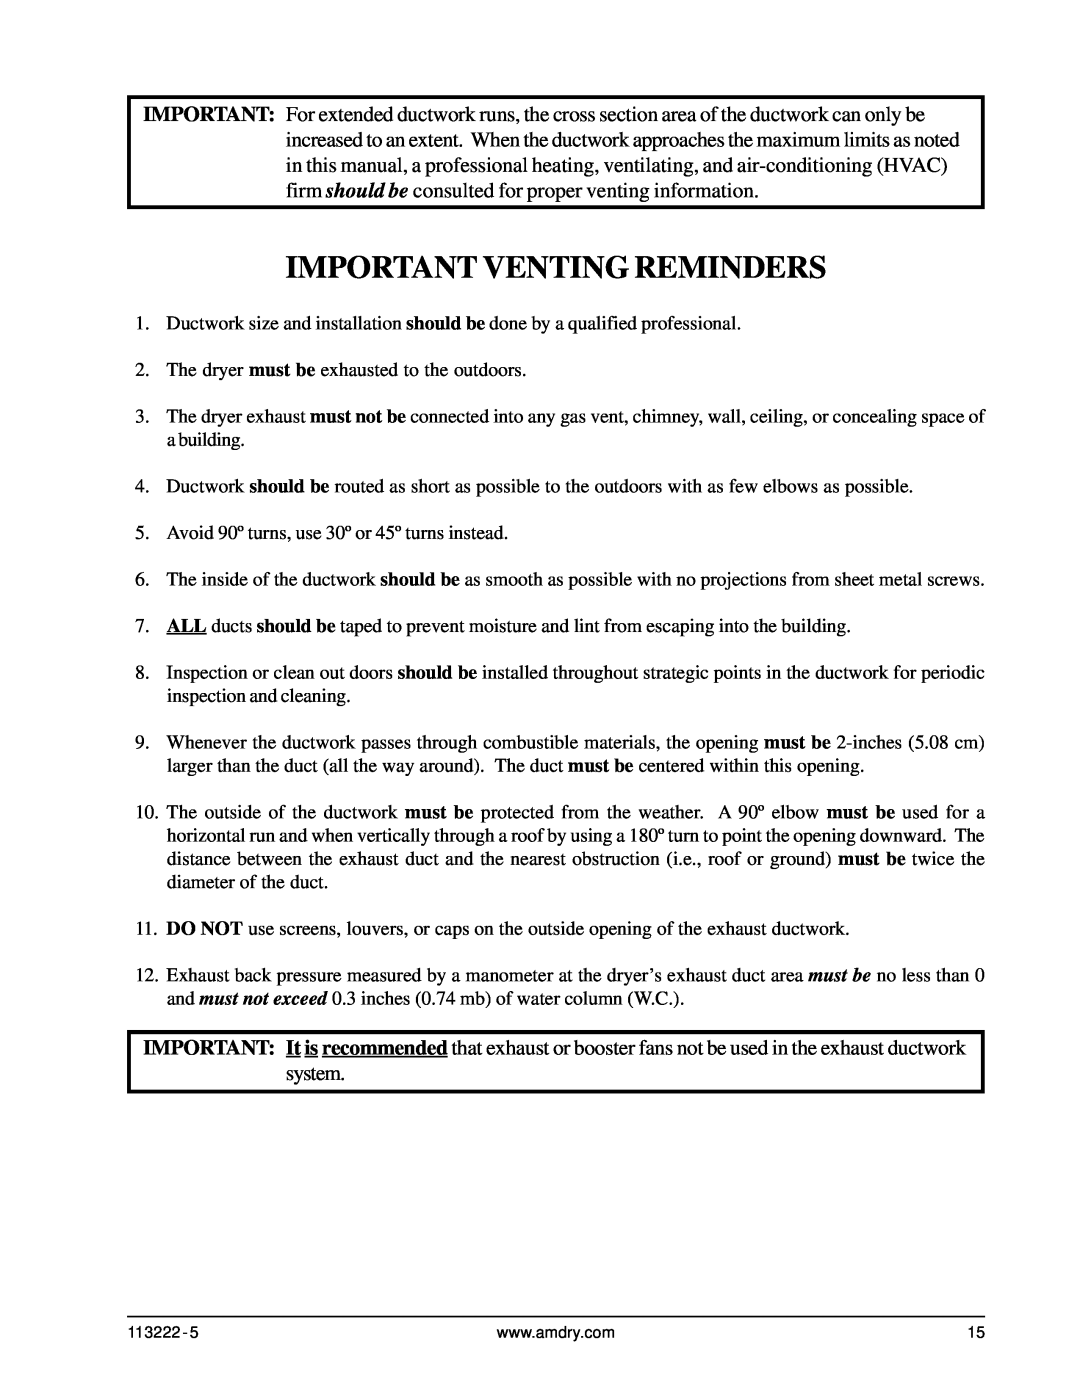 American Dryer Corp AD-24 Phase 7 installation manual Important Venting Reminders 